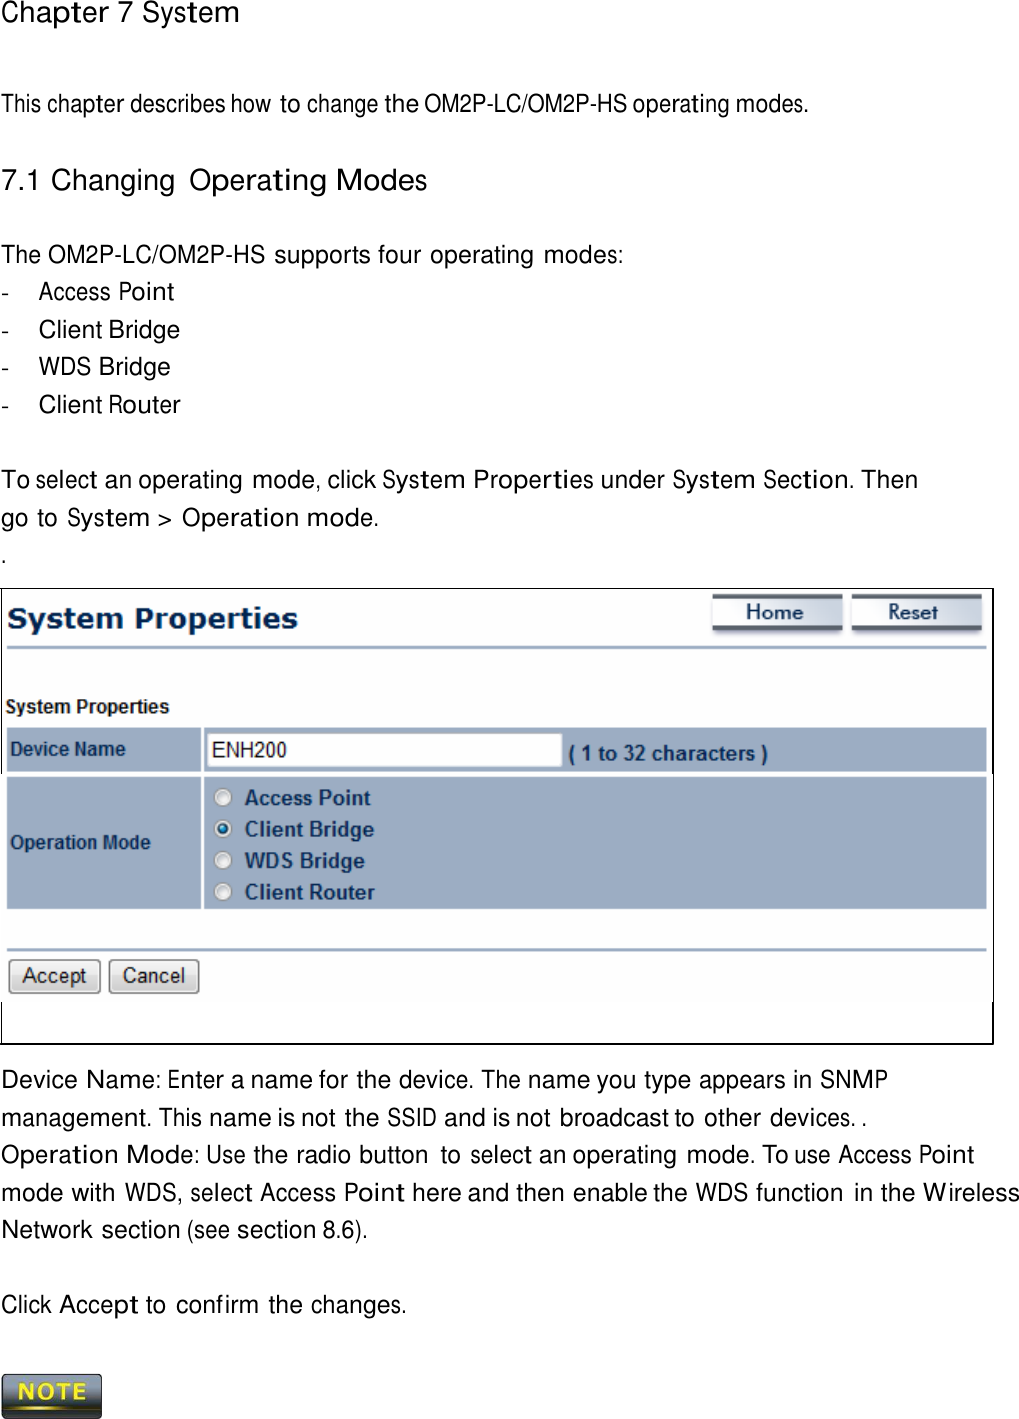 Chapter 7 System     This chapter describes how to change the OM2P-LC/OM2P-HS operating modes.   7.1 Changing Operating Modes   The OM2P-LC/OM2P-HS supports four operating modes: - Access Point - Client Bridge - WDS Bridge - Client Router   To select an operating mode, click System Properties under System Section. Then go to System &gt; Operation mode. .                         Device Name: Enter a name for the device. The name you type appears in SNMP management. This name is not the SSID and is not broadcast to other devices. . Operation Mode: Use the radio button  to select an operating mode. To use Access Point mode with WDS, select Access Point here and then enable the WDS function in the Wireless Network section (see section 8.6).   Click Accept to confirm the changes.     